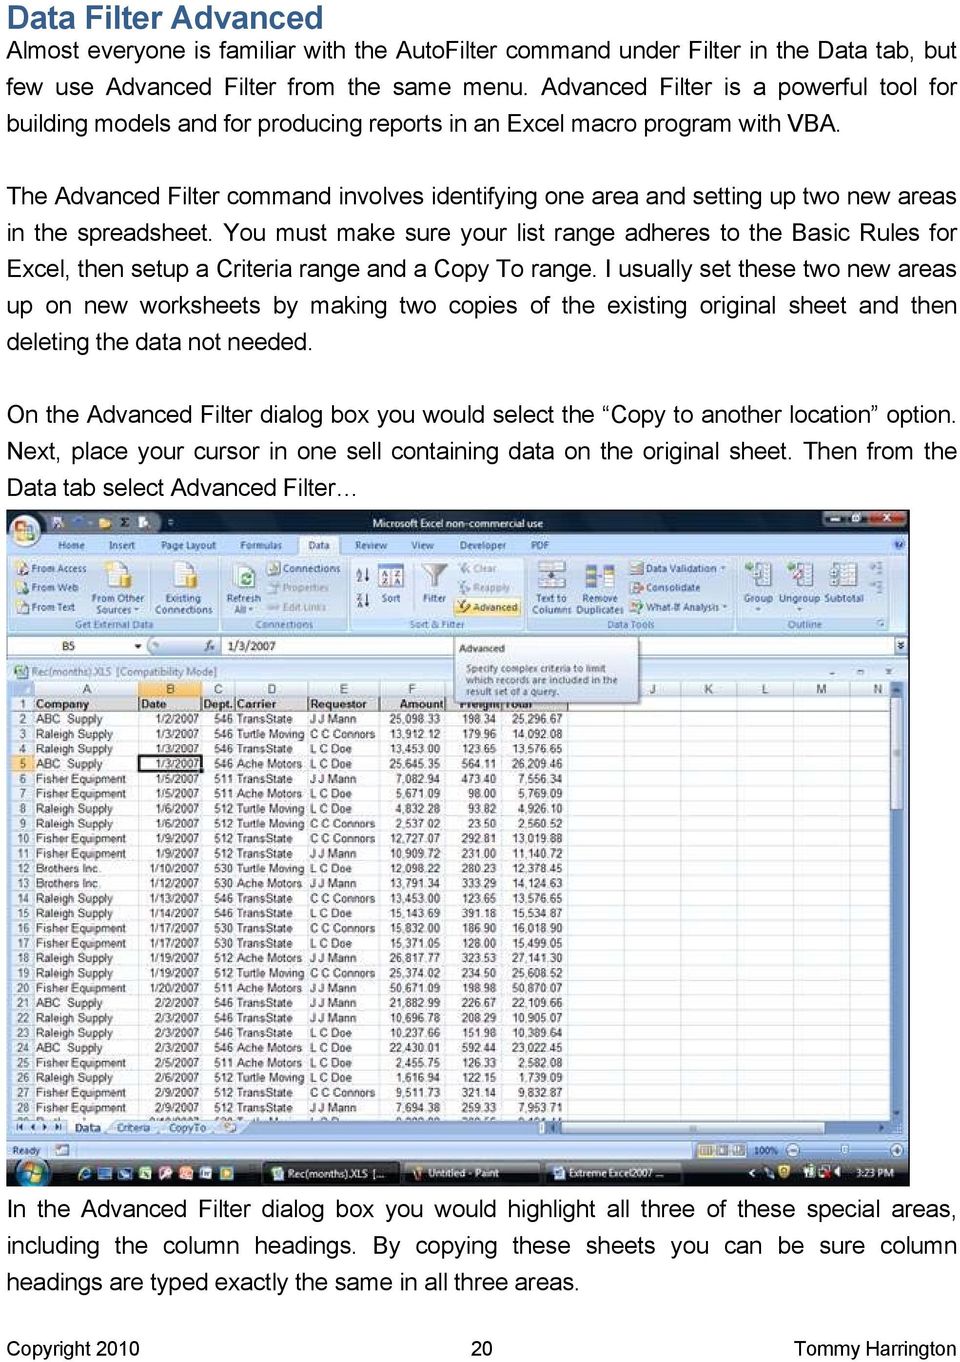 The Advanced Filter command involves identifying one area and setting up two new areas in the spreadsheet.